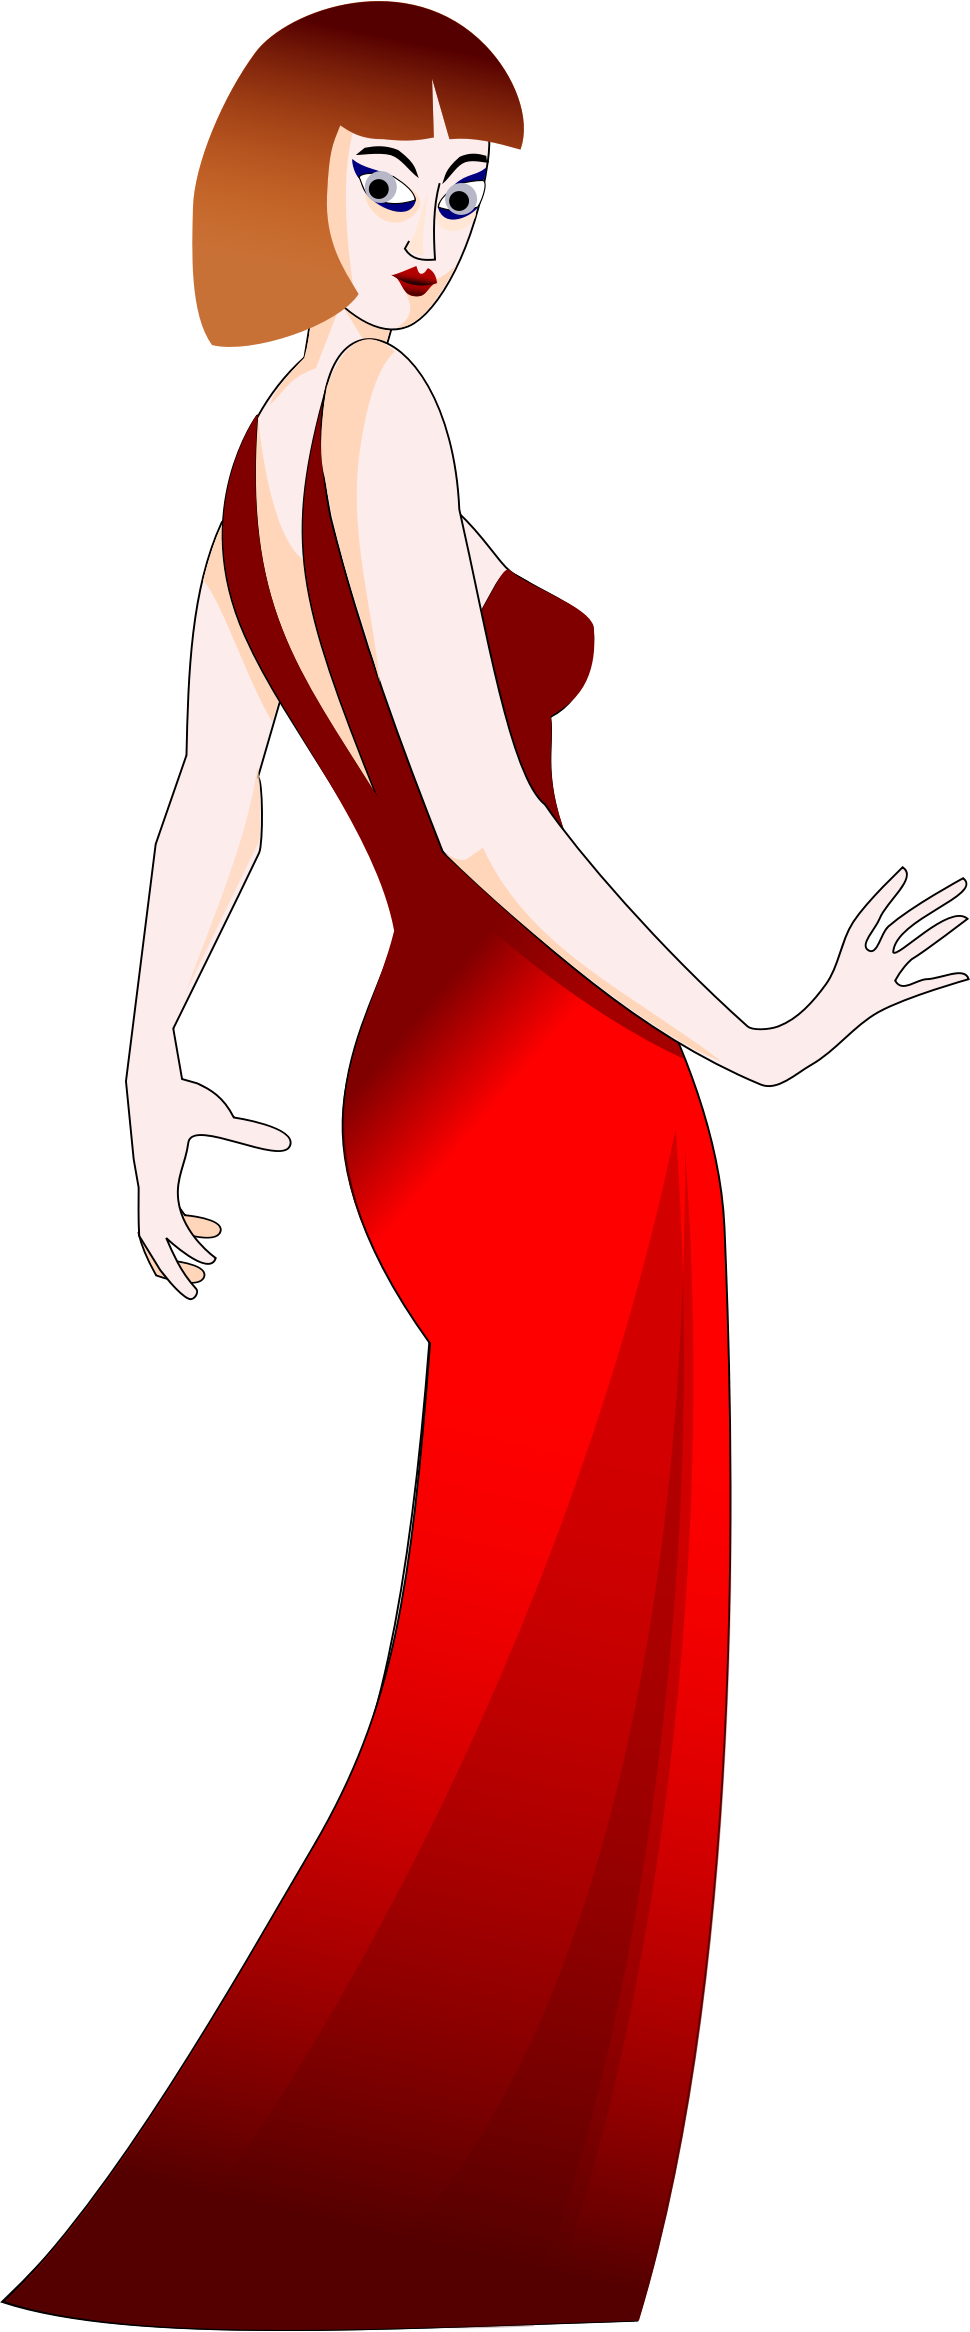 Woman In Red Dress - Woman (970x2332)